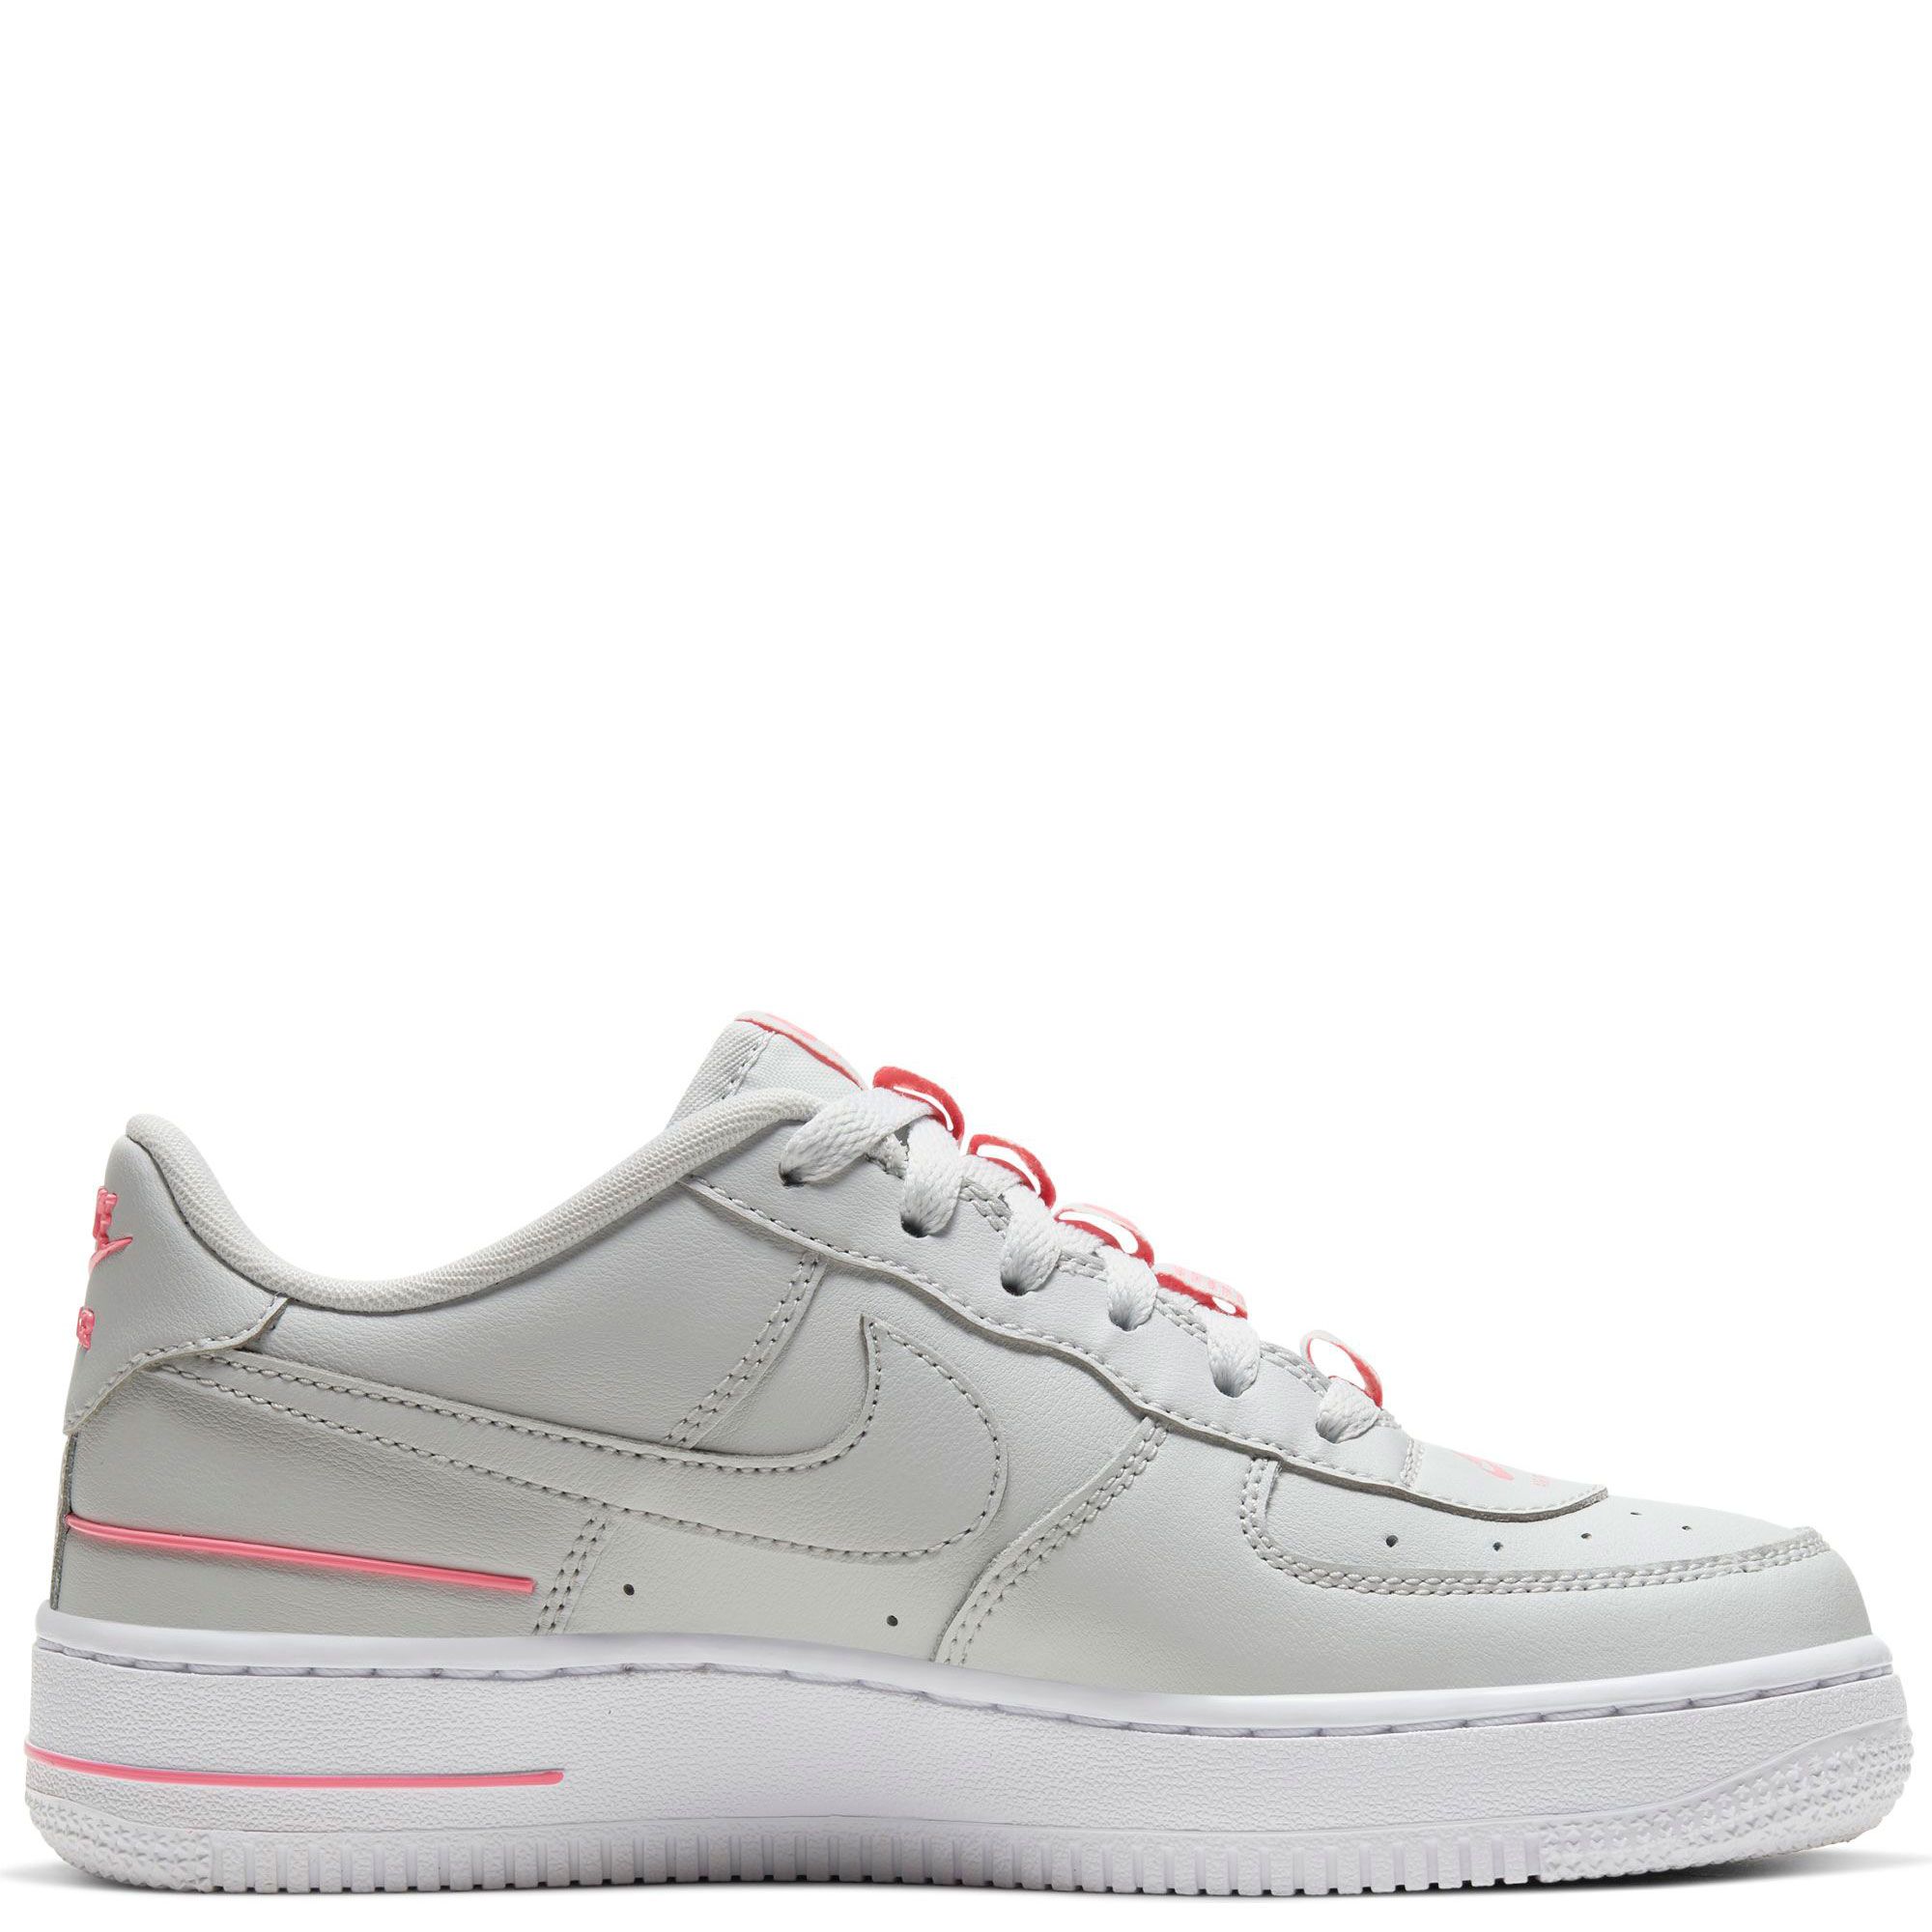 Nike Air Force 1 LV8 3 Double Air Photon Dust Pink CJ4092-002 For